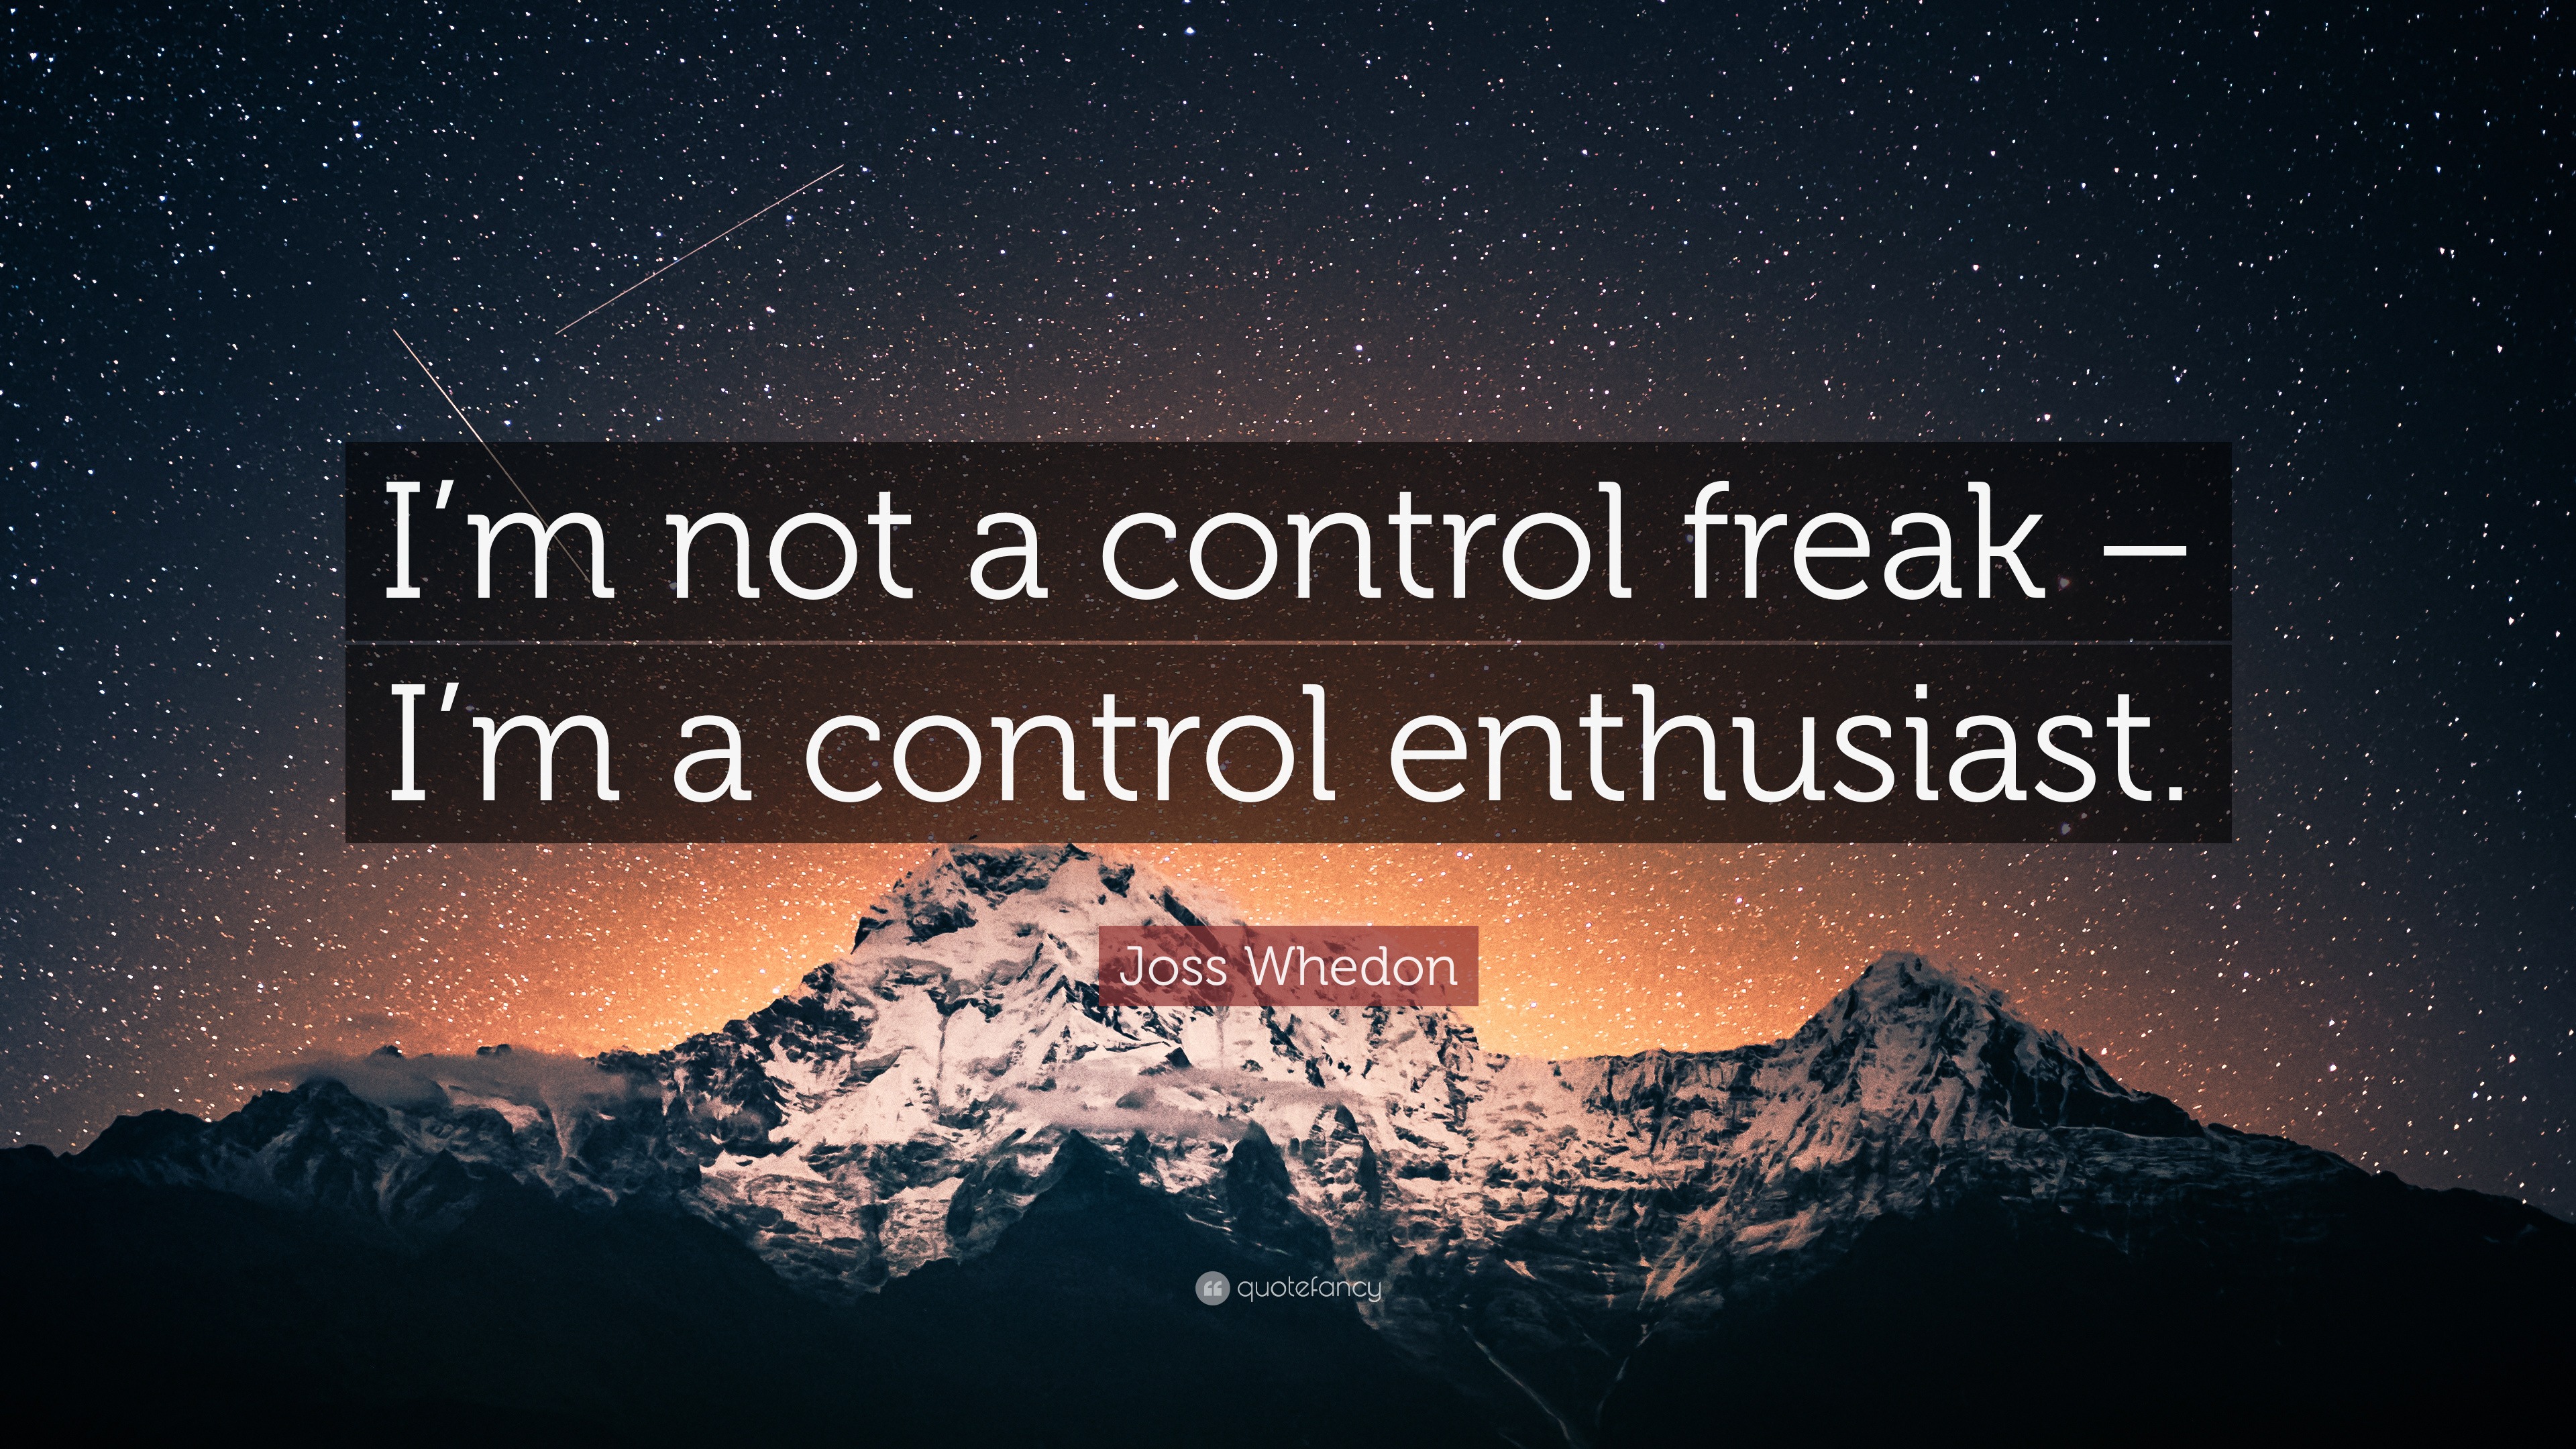 Joss Whedon Quote: “I'm not a control freak – I'm a control enthusiast.”